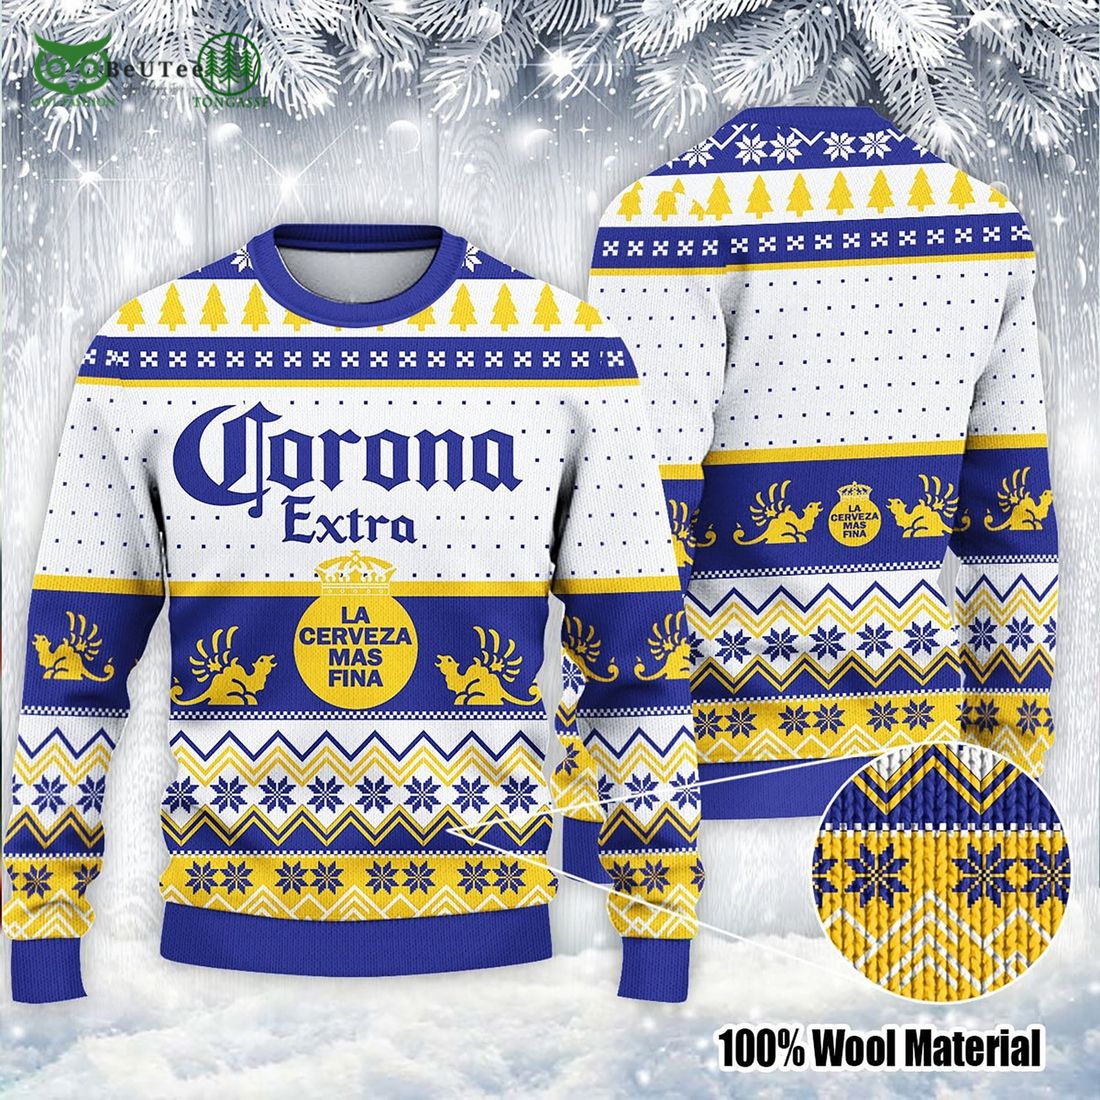 corona extra beer lover christmas sweater 1 IFoBV